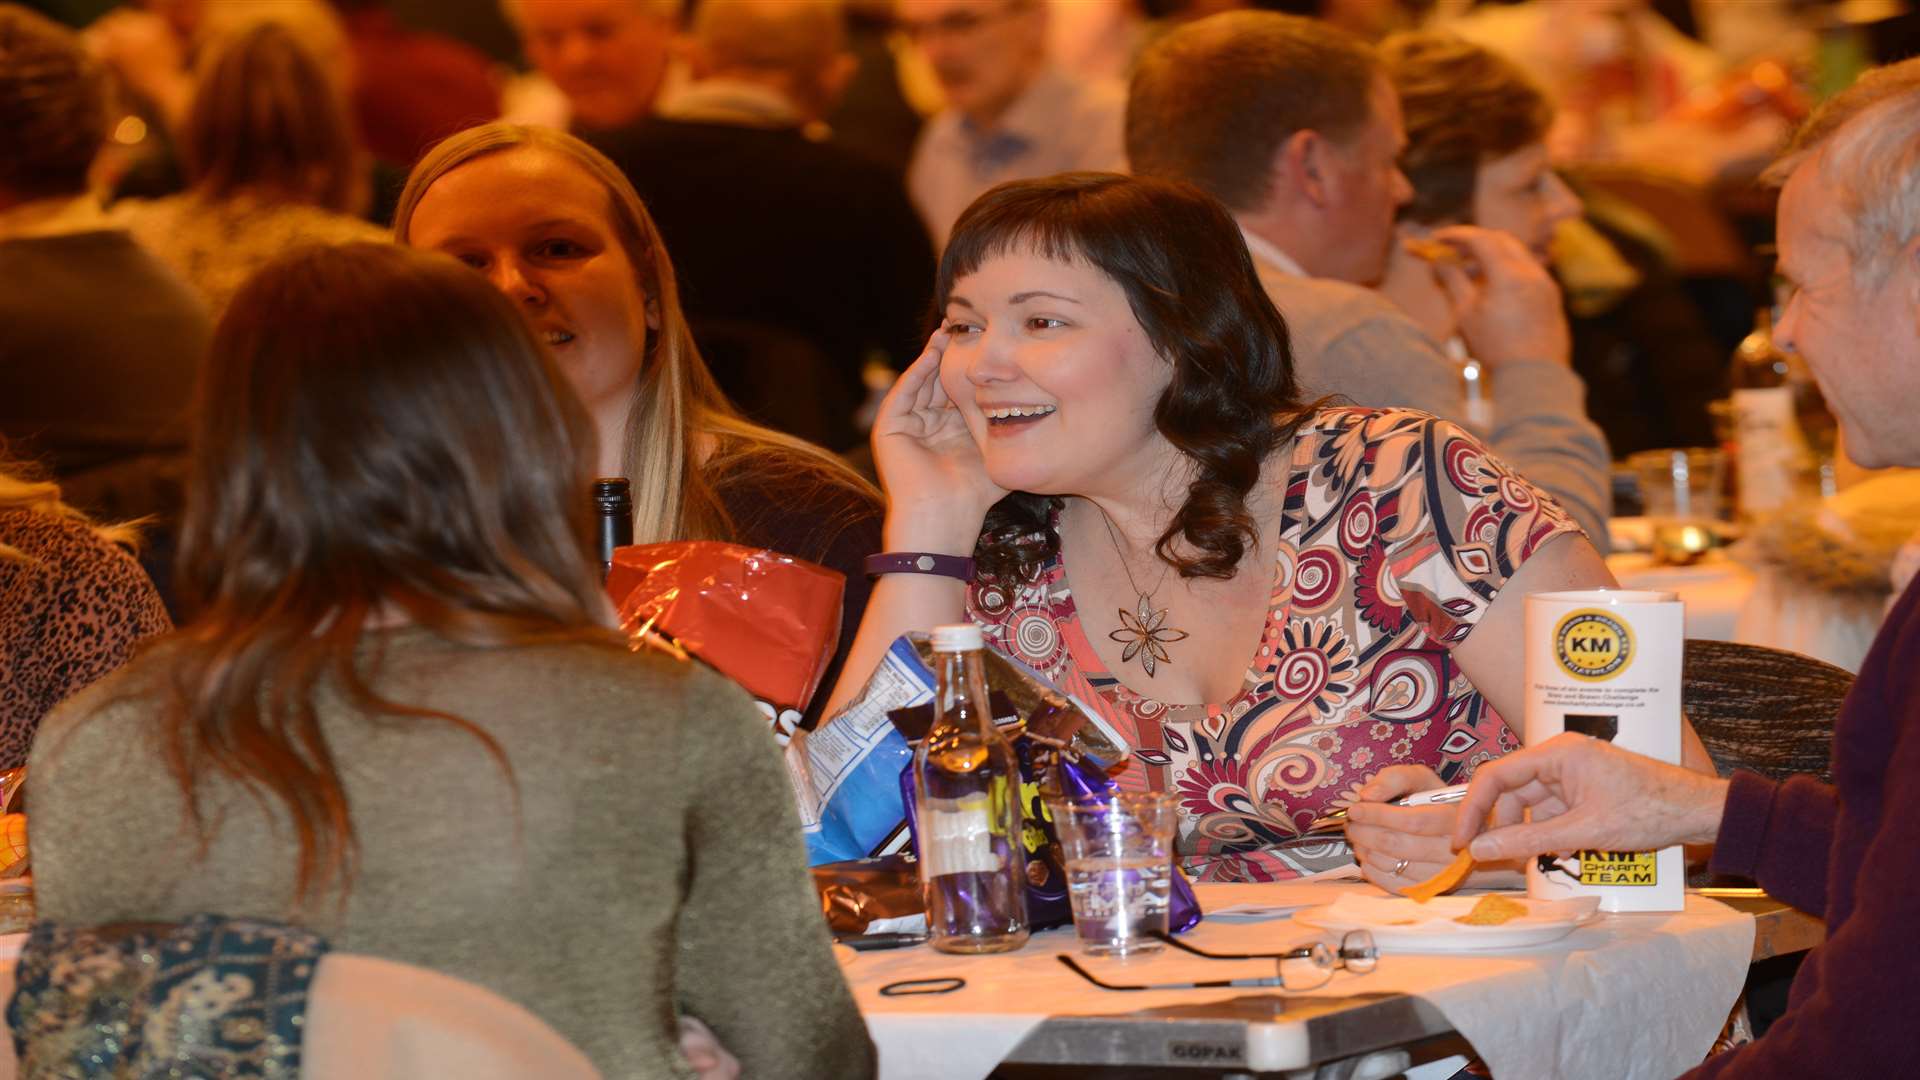 Could you think up a prize winning question for the KM Big Charity Quiz?